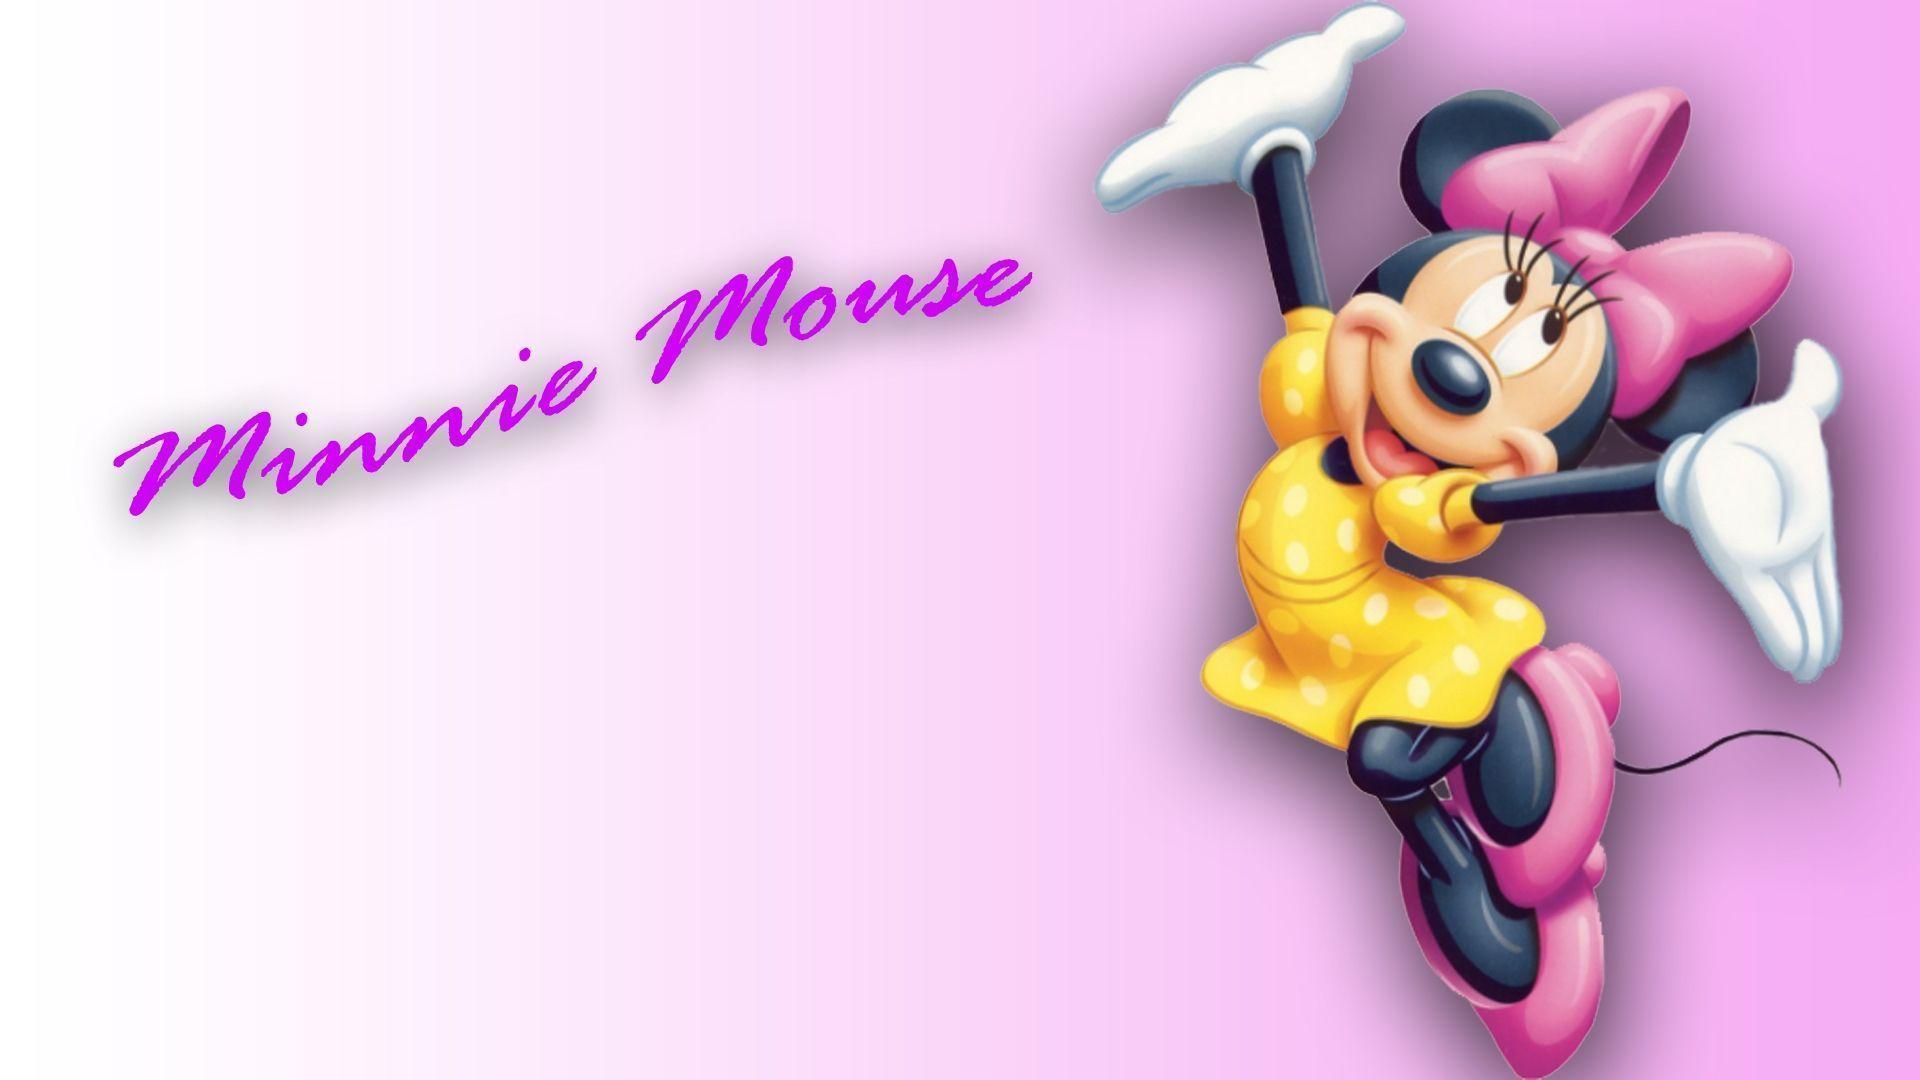 Animals For > Minnie Mouse Wallpaper For Desktop